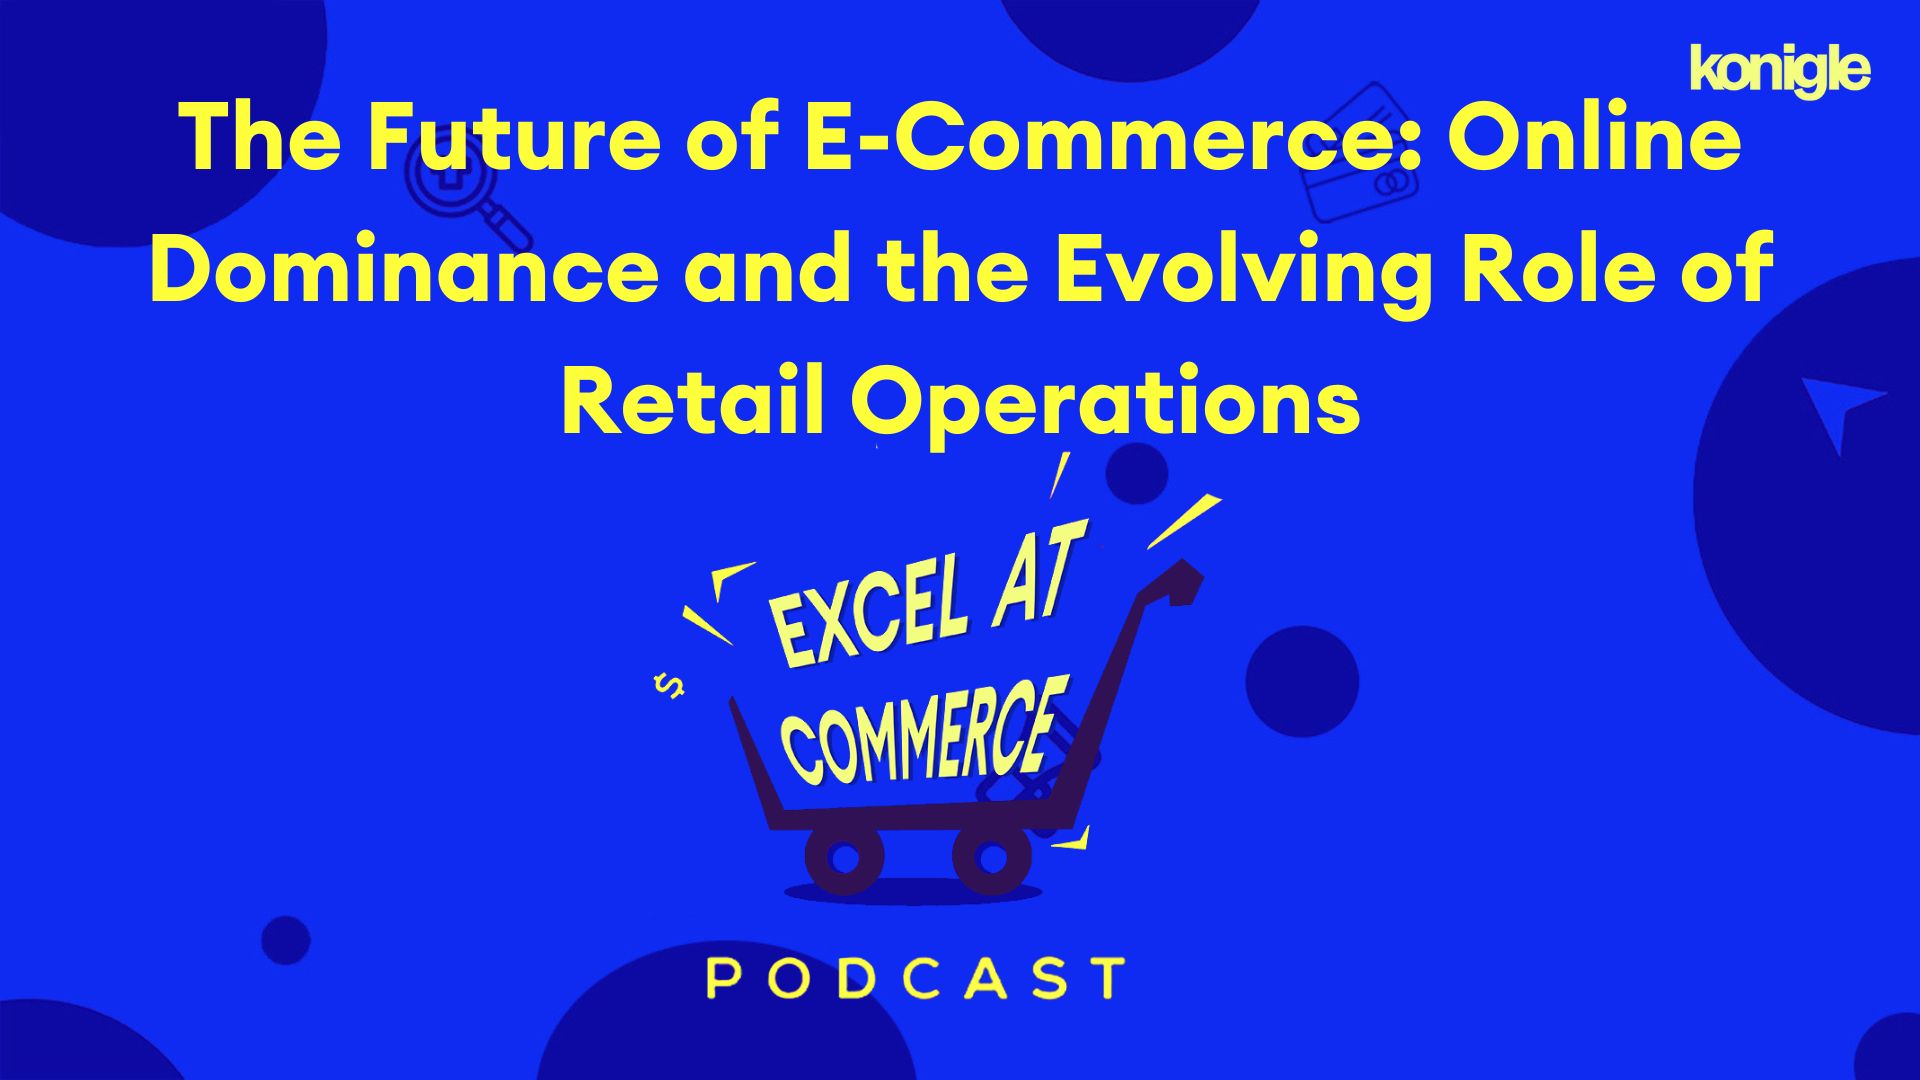 The Future of E-Commerce: Online Dominance and the Evolving Role of Retail Operations